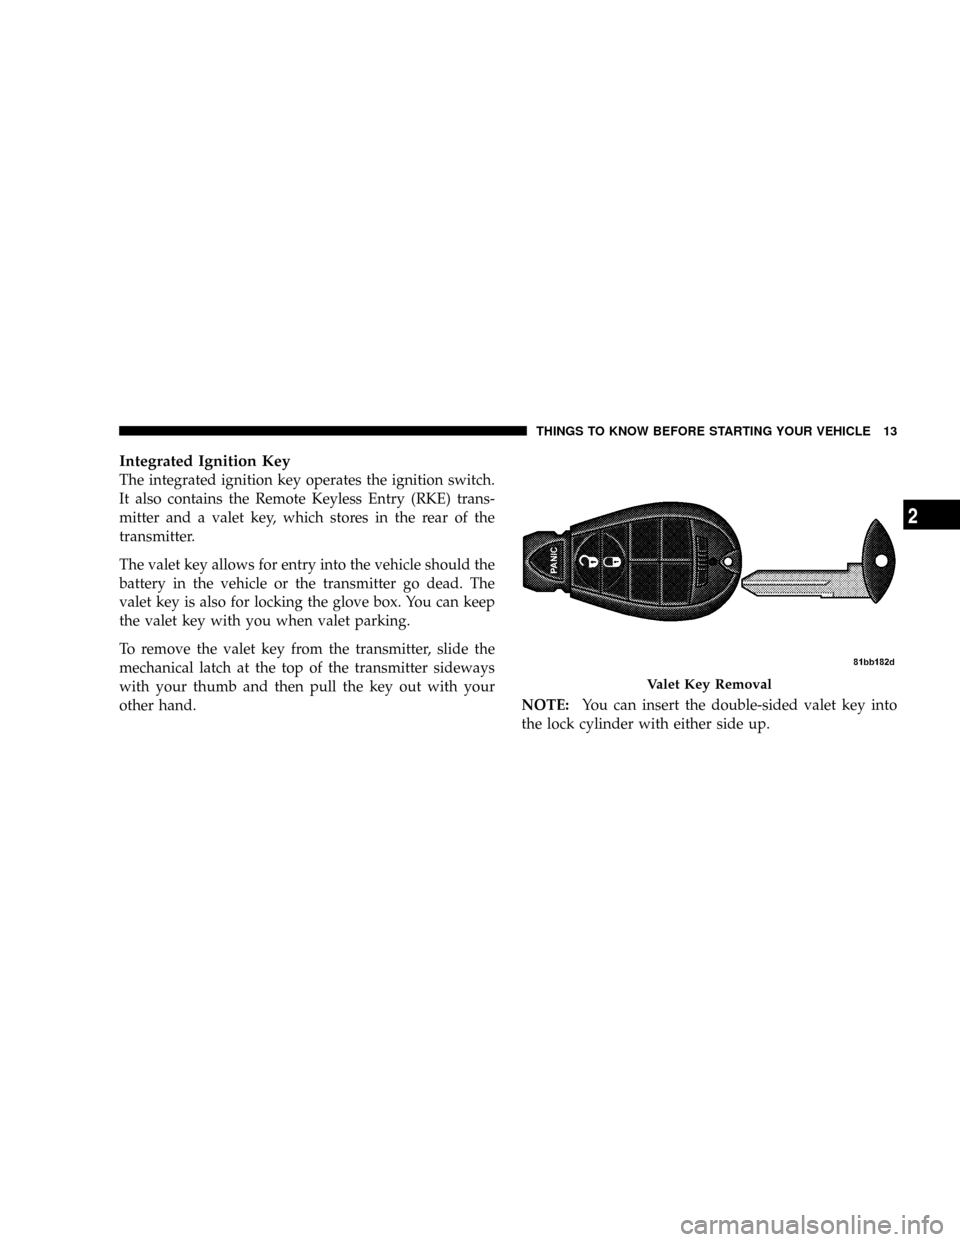 CHRYSLER TOWN AND COUNTRY 2008 5.G User Guide Integrated Ignition Key
The integrated ignition key operates the ignition switch.
It also contains the Remote Keyless Entry (RKE) trans-
mitter and a valet key, which stores in the rear of the
transmi